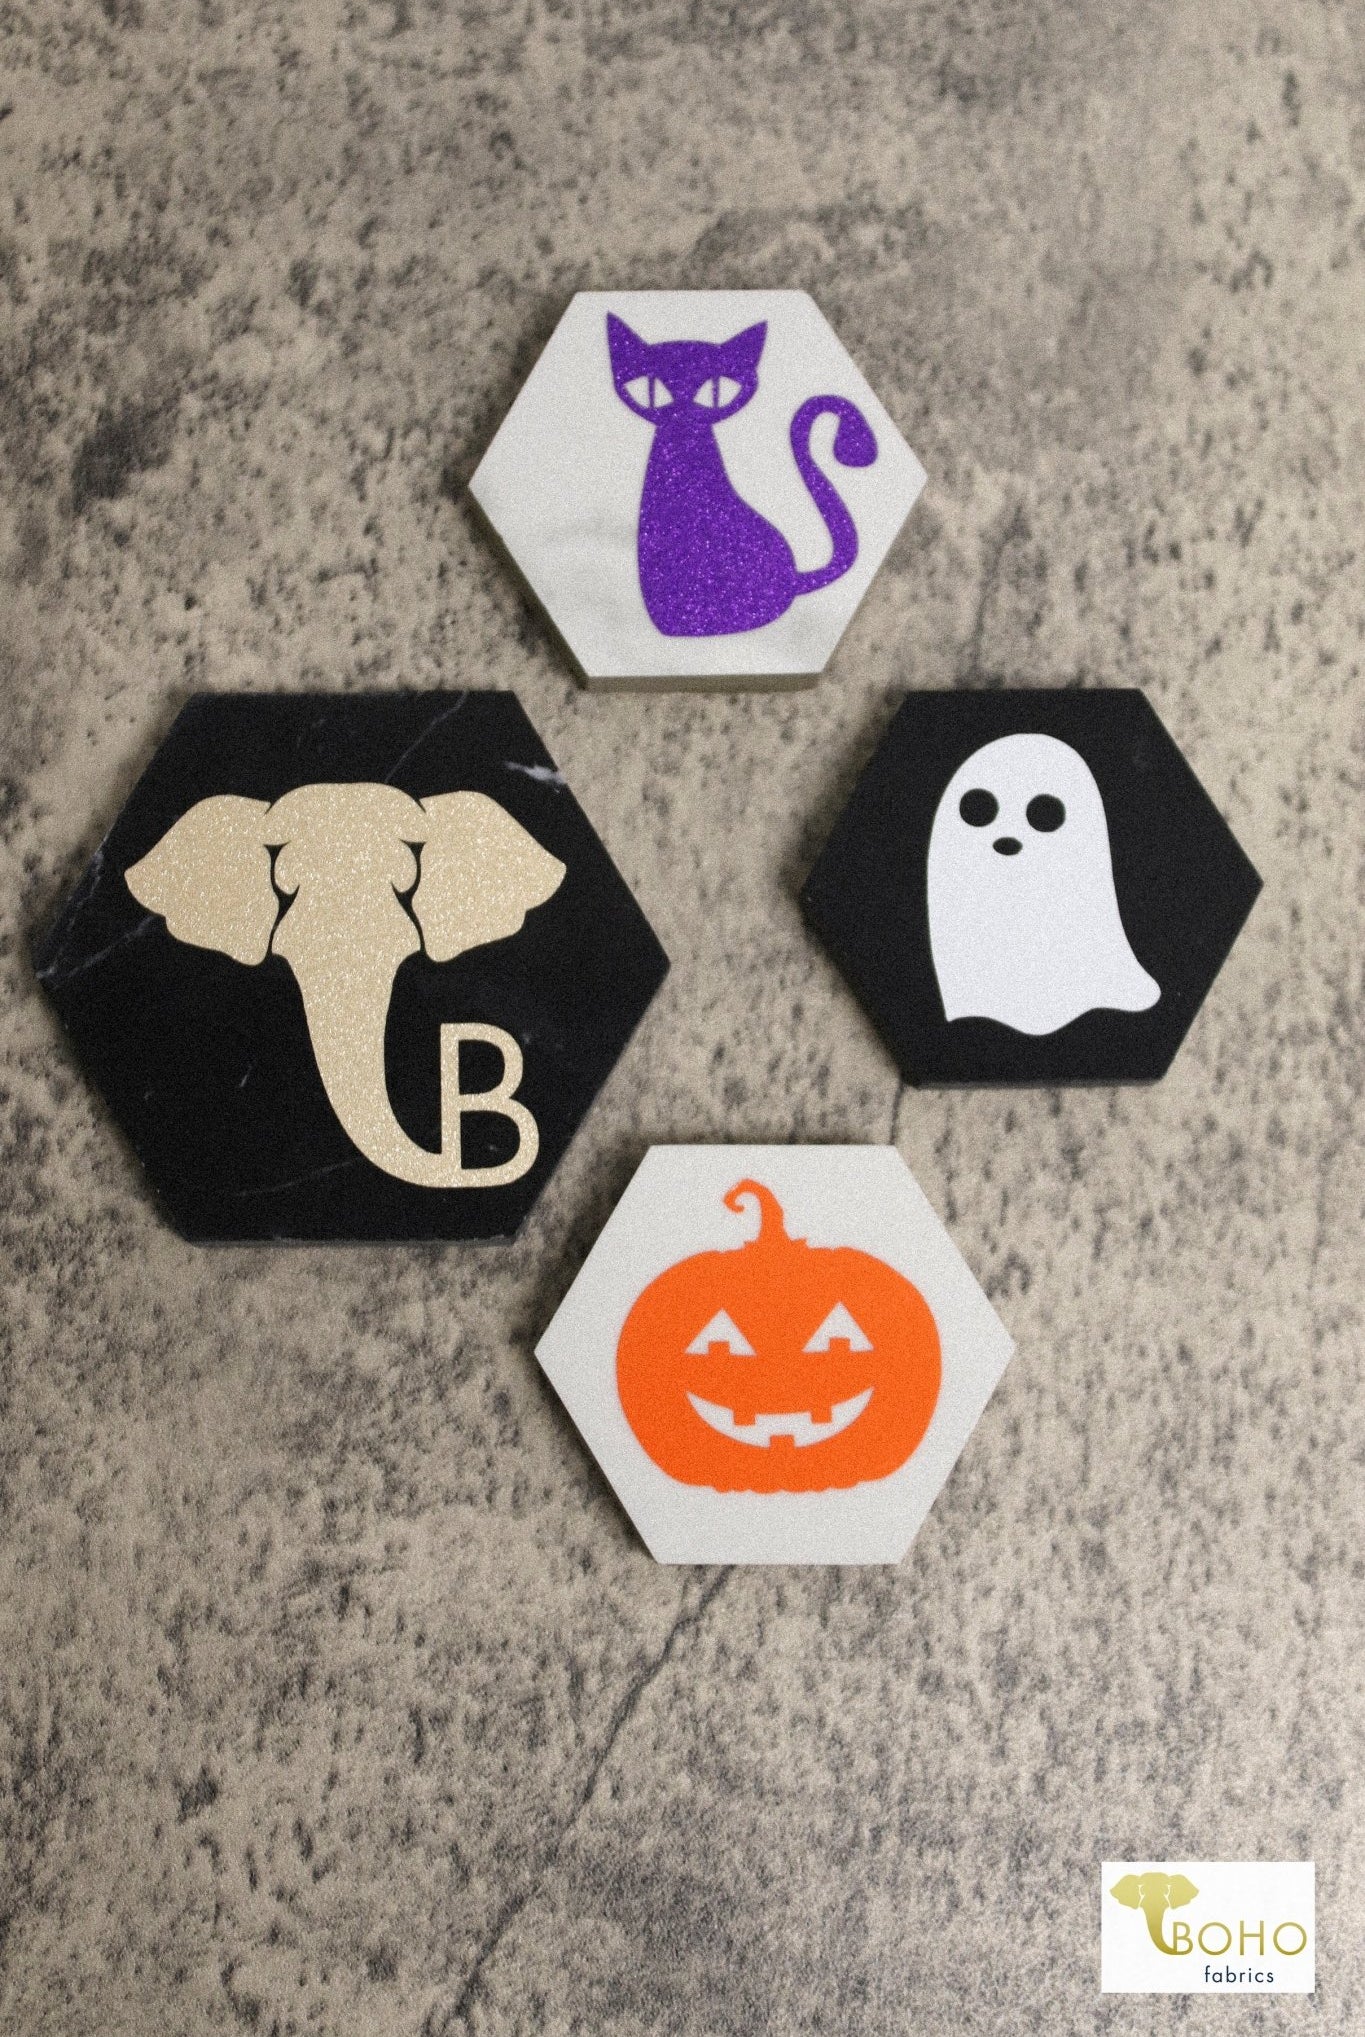 Mini Halloween Marble Pattern Weight Set (4 Pieces). FREE WITH ORDERS $100+ - Boho Fabrics